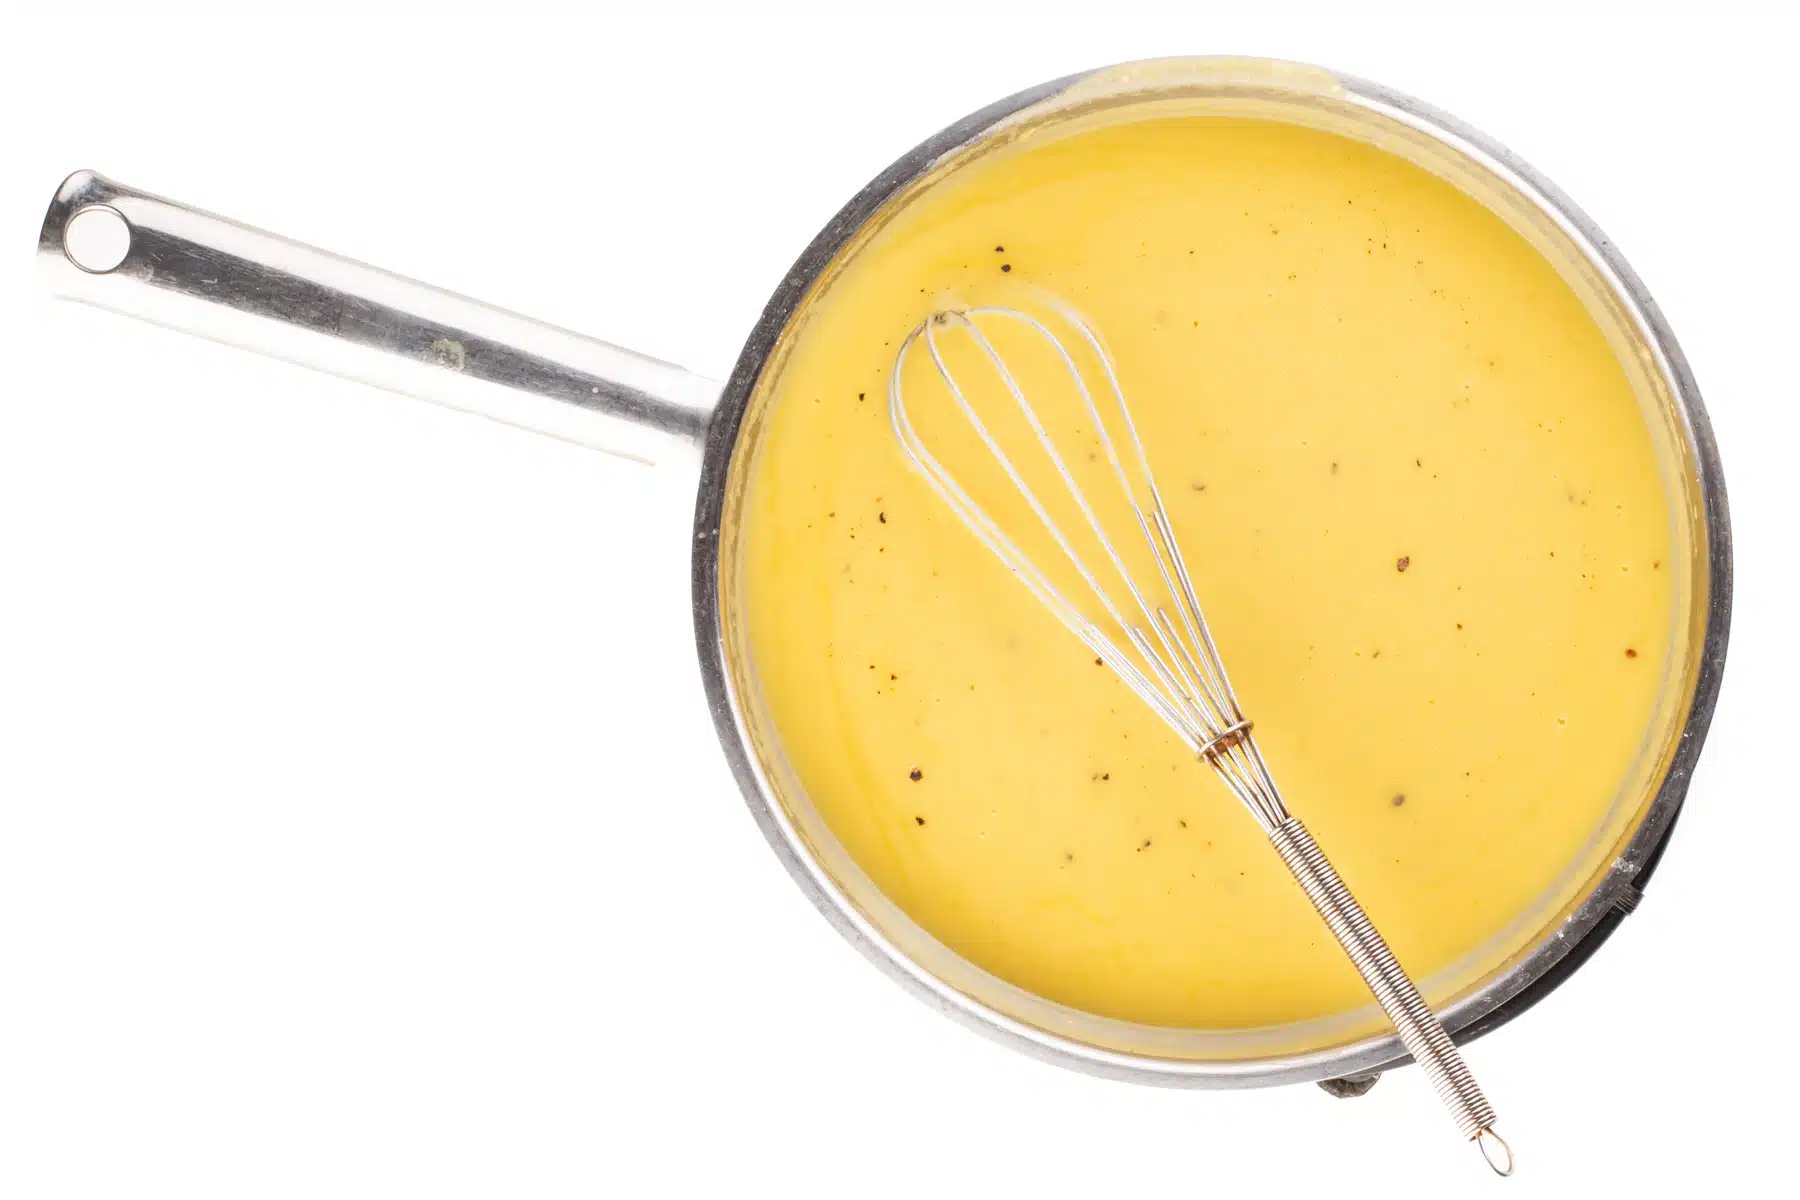 A skillet full of sauce with a whisk in the pan.